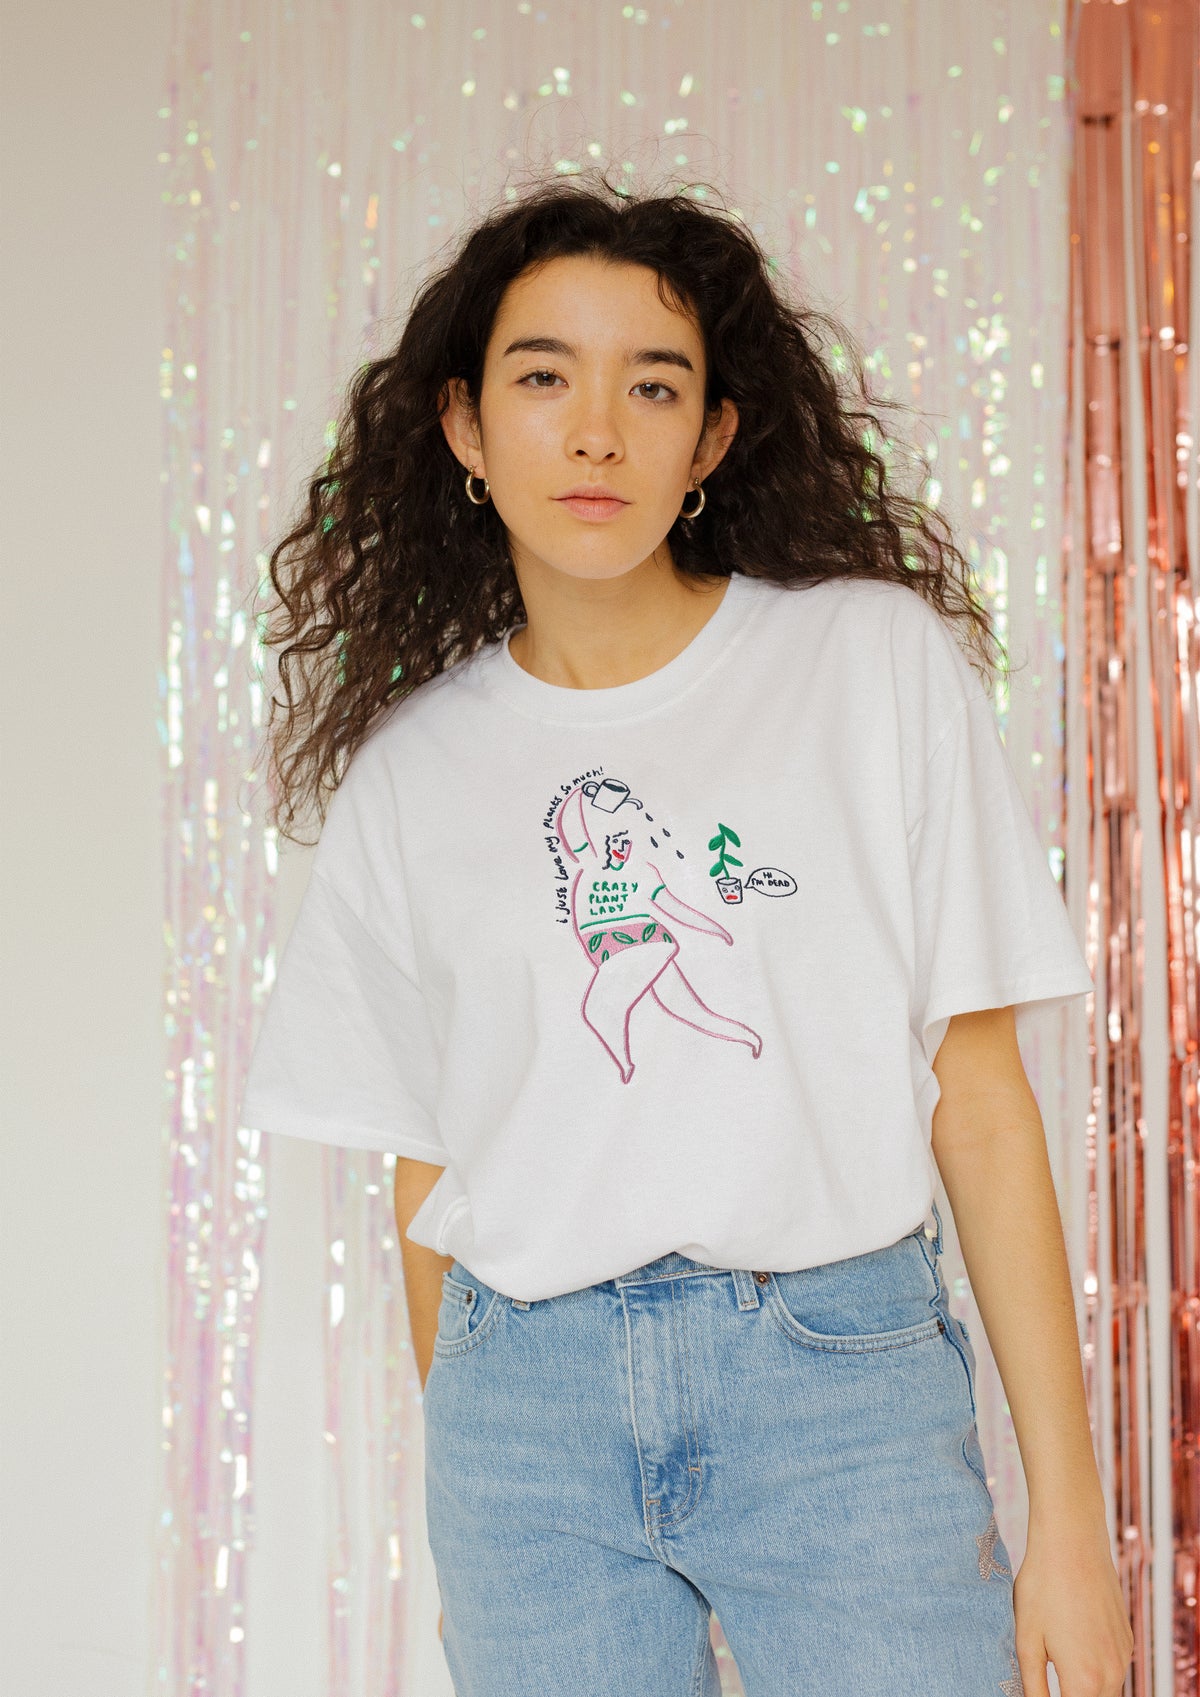 Crazy Plant Lady Embroidered T-Shirt